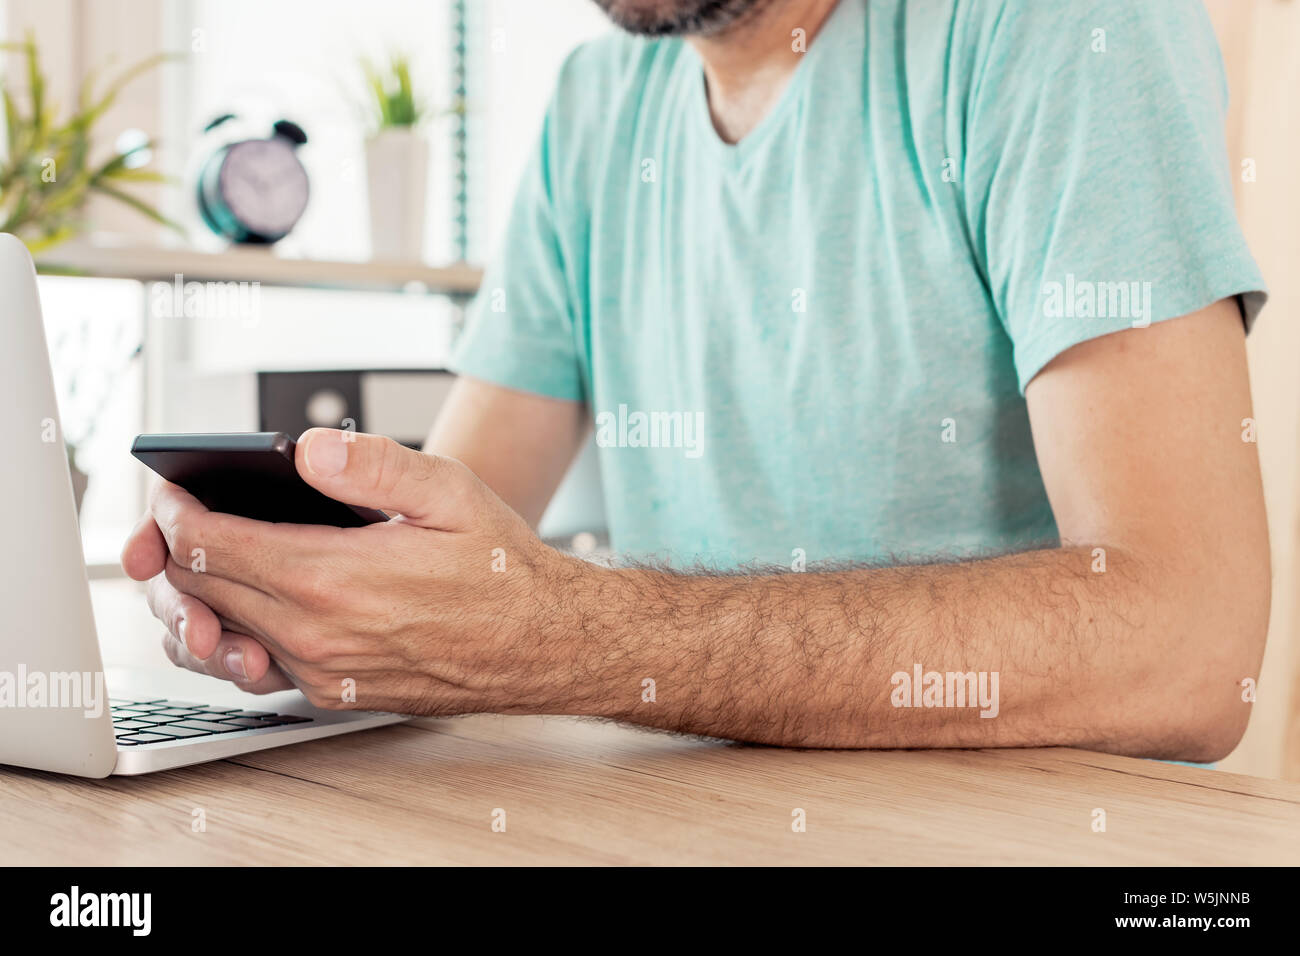 Freelancer using smart phone in home office, close up of hands, selective focus Stock Photo